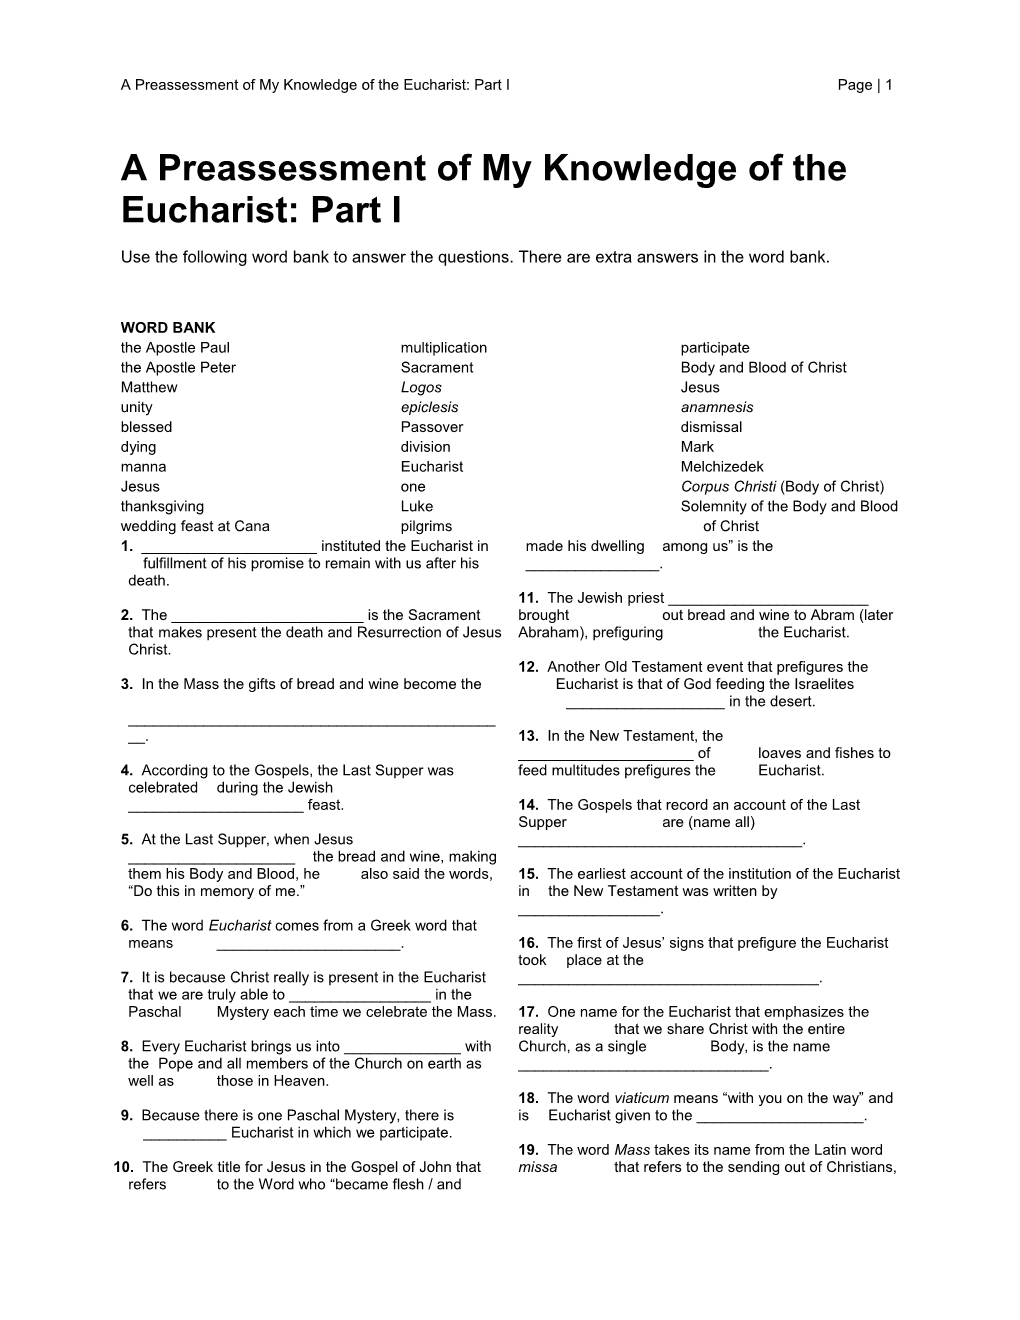 A Preassessment of My Knowledge of the Eucharist: Part I